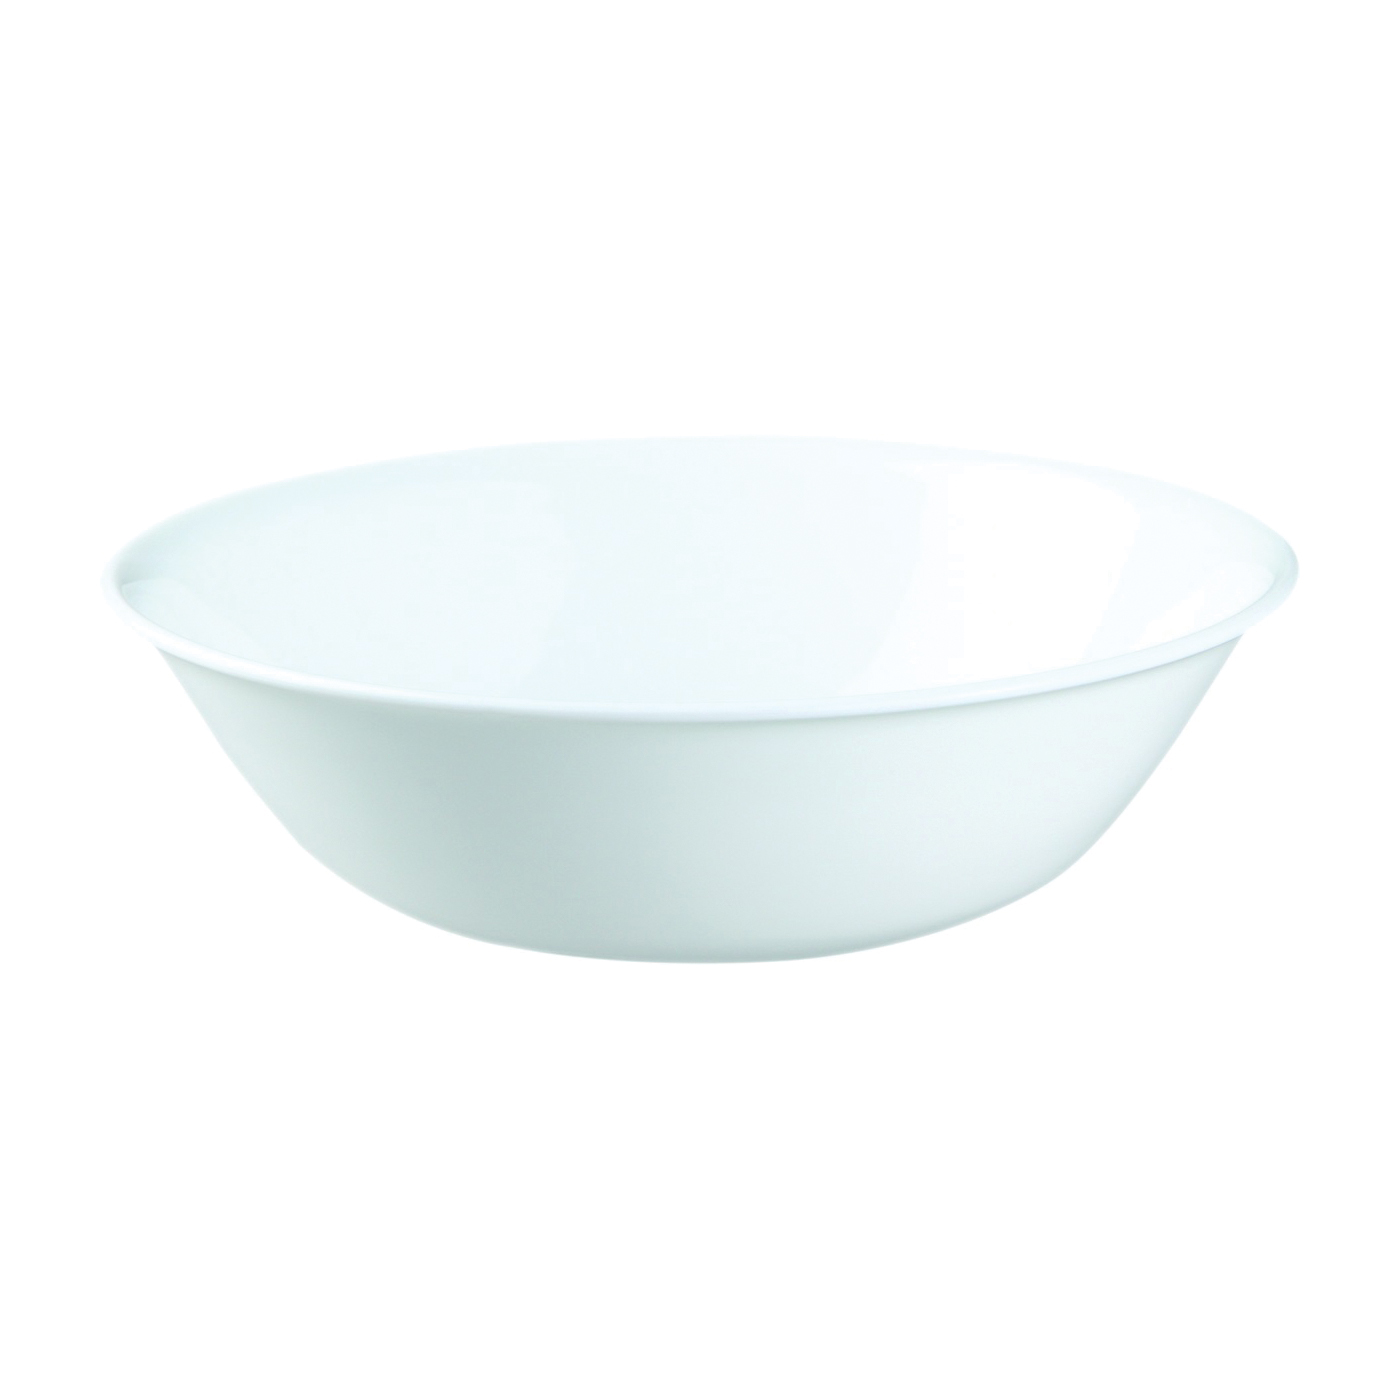 Corelle 6003911 Serving Bowl, Vitrelle Glass, For: Dishwashers and Microwave Ovens - 1